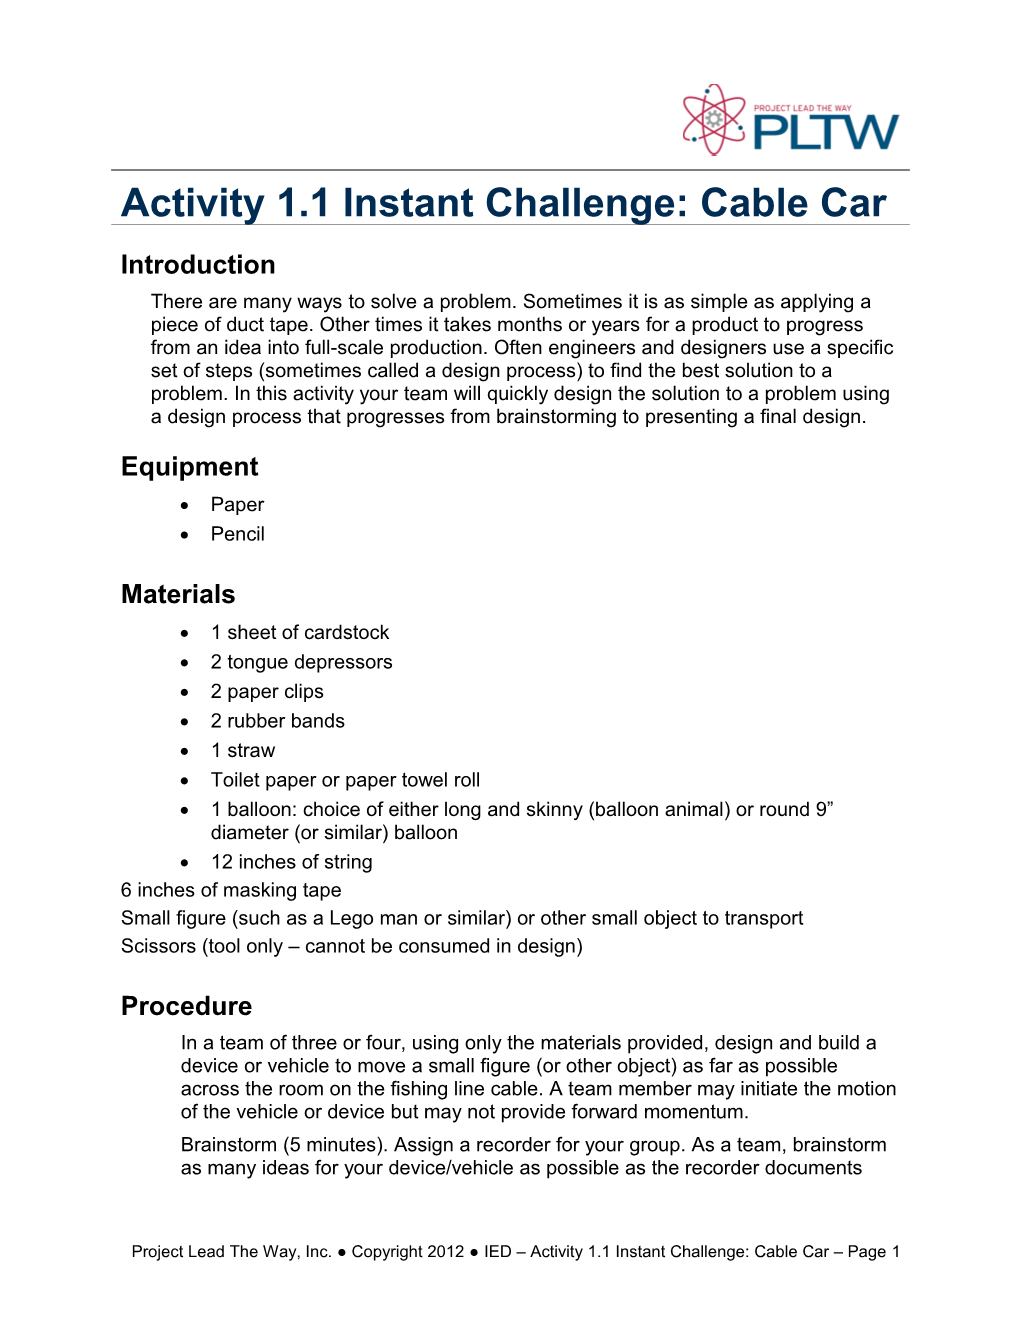 Activity 1.1 Instant Challenge: Cable Car